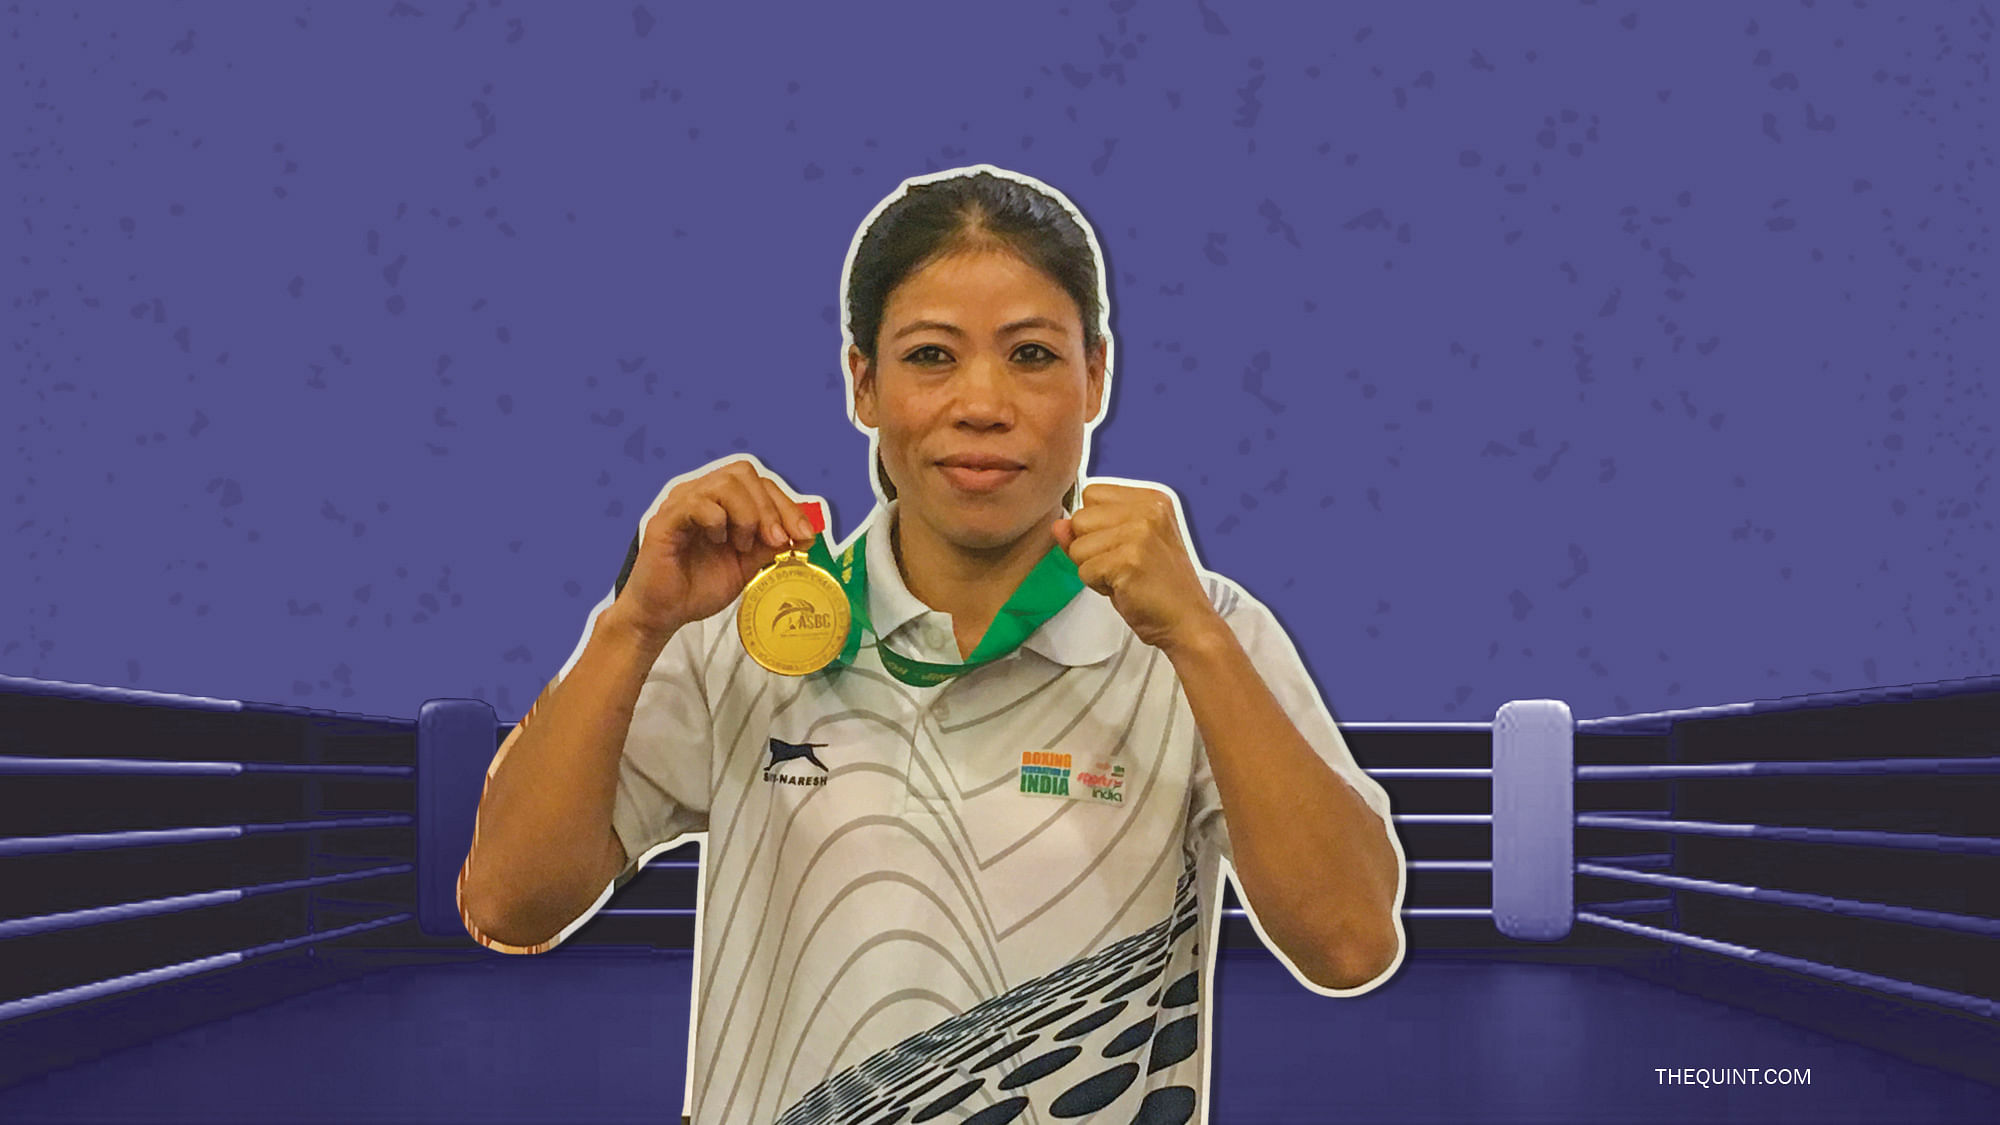 File photo of Mary Kom who won a gold for India at the Silesian Open Boxing Tournament this Sunday.